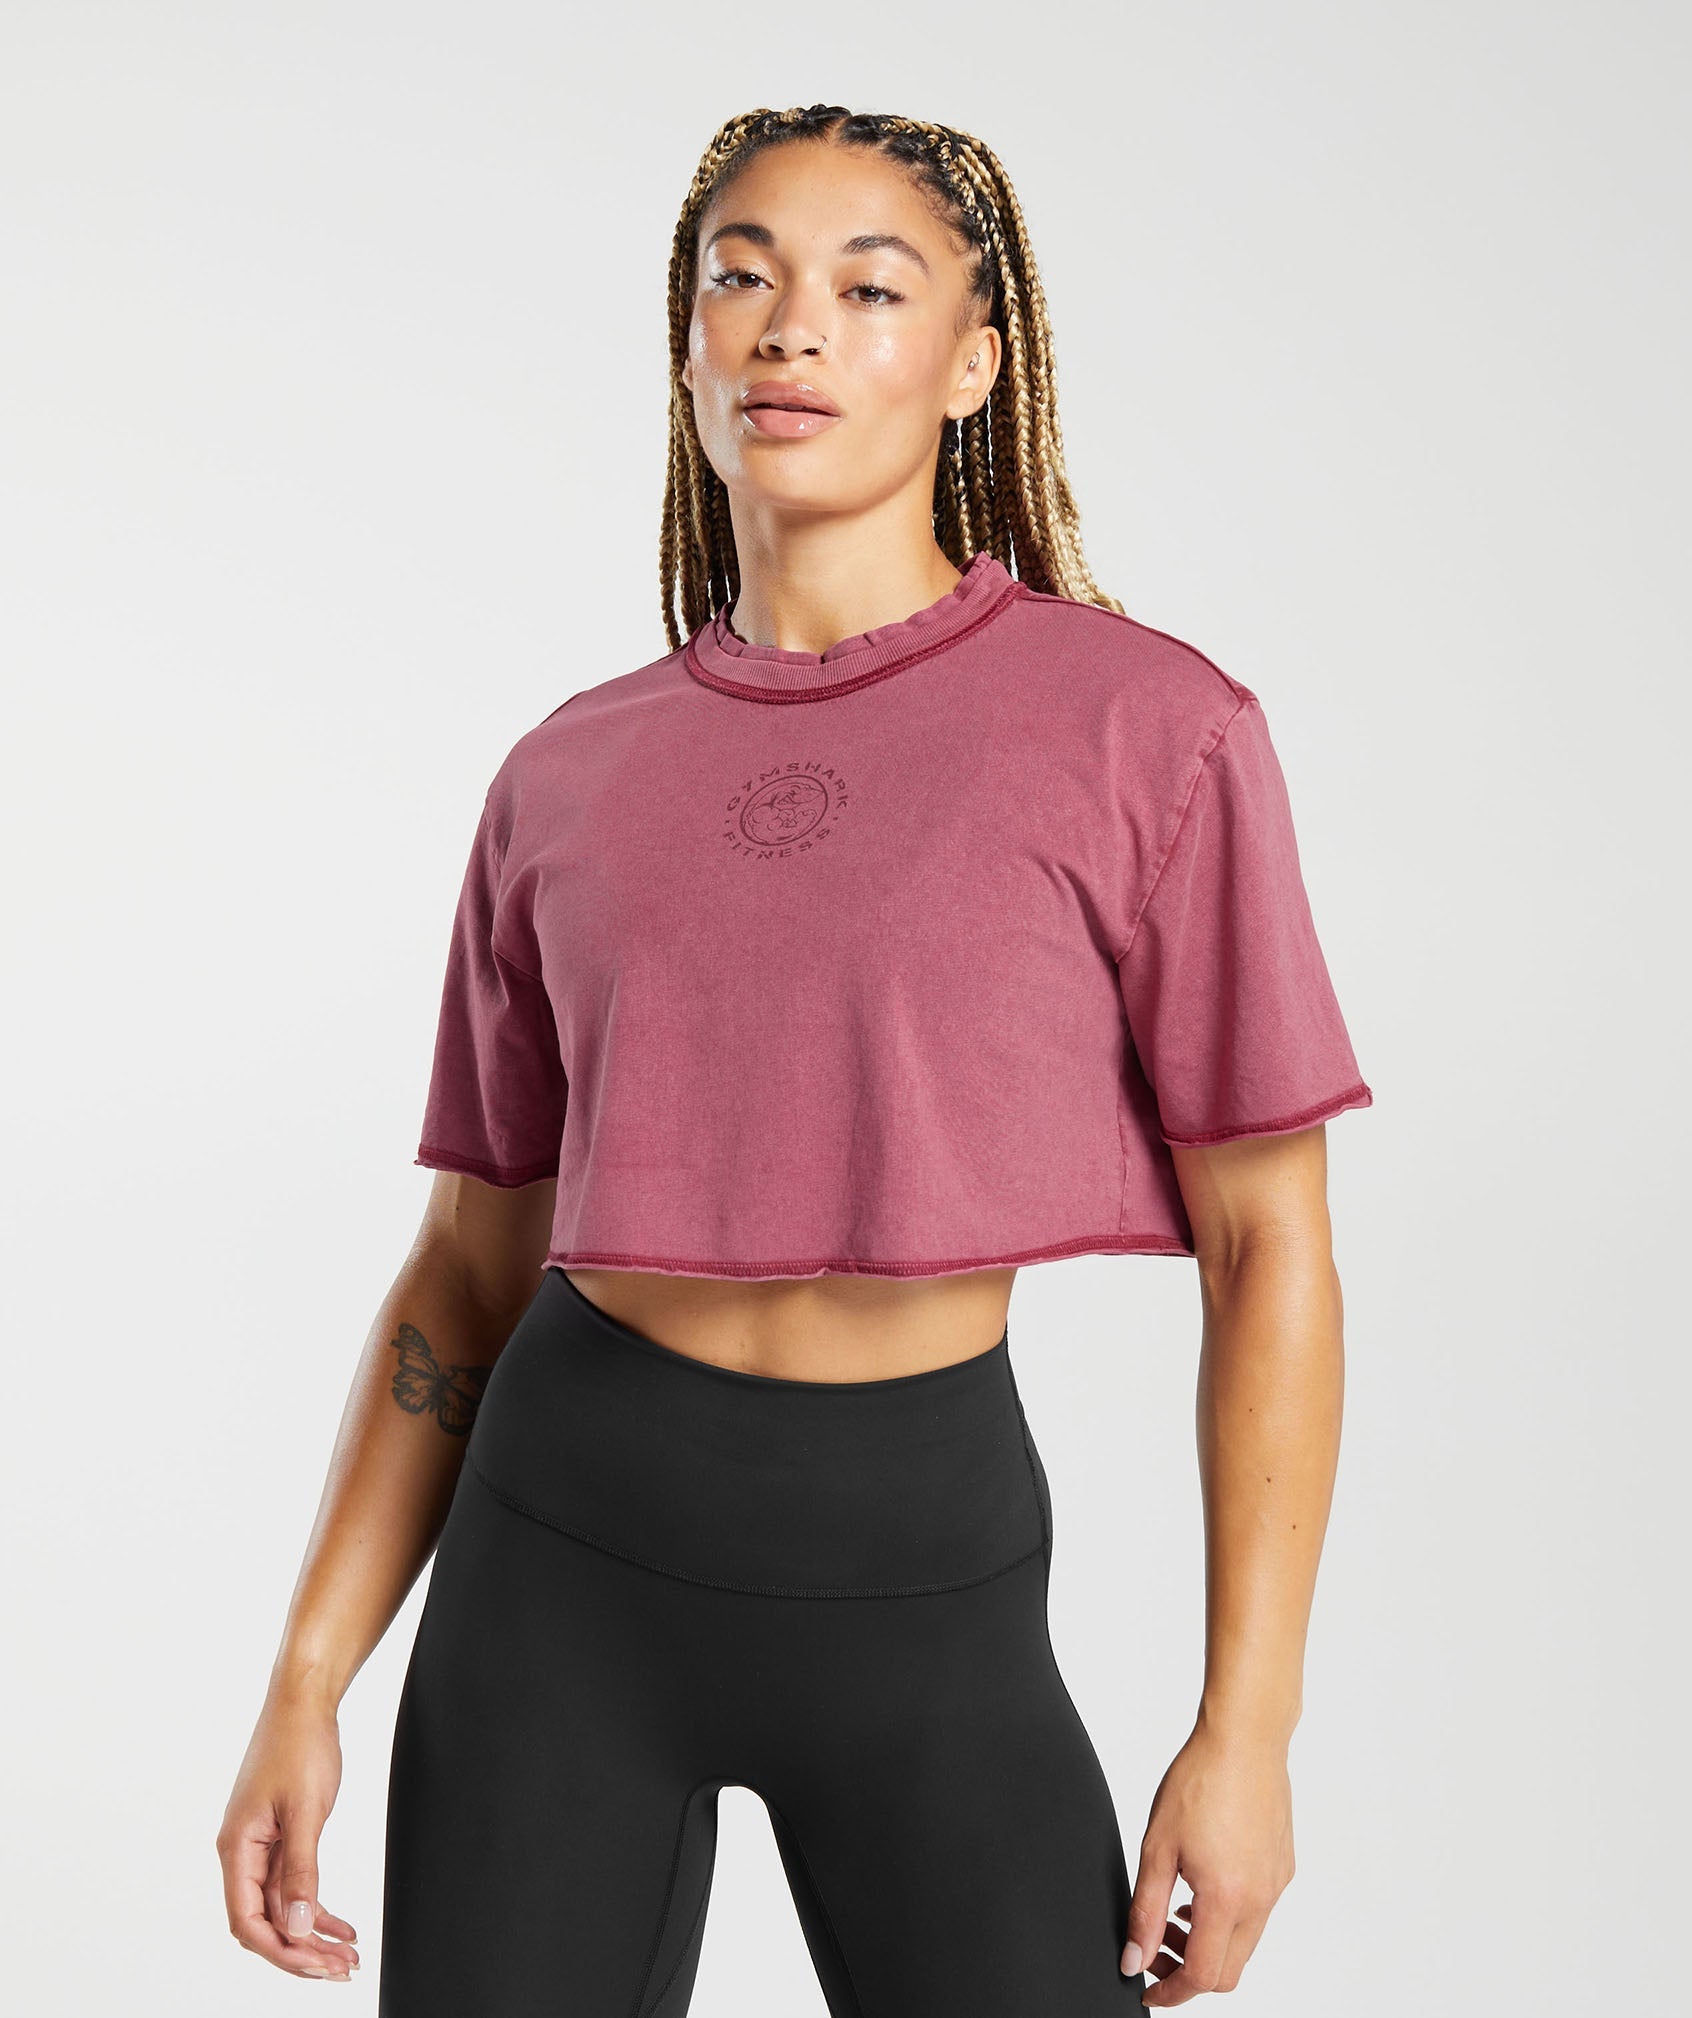 Legacy Washed Crop Top in Raspberry Pink/Acid Wash Small Ball